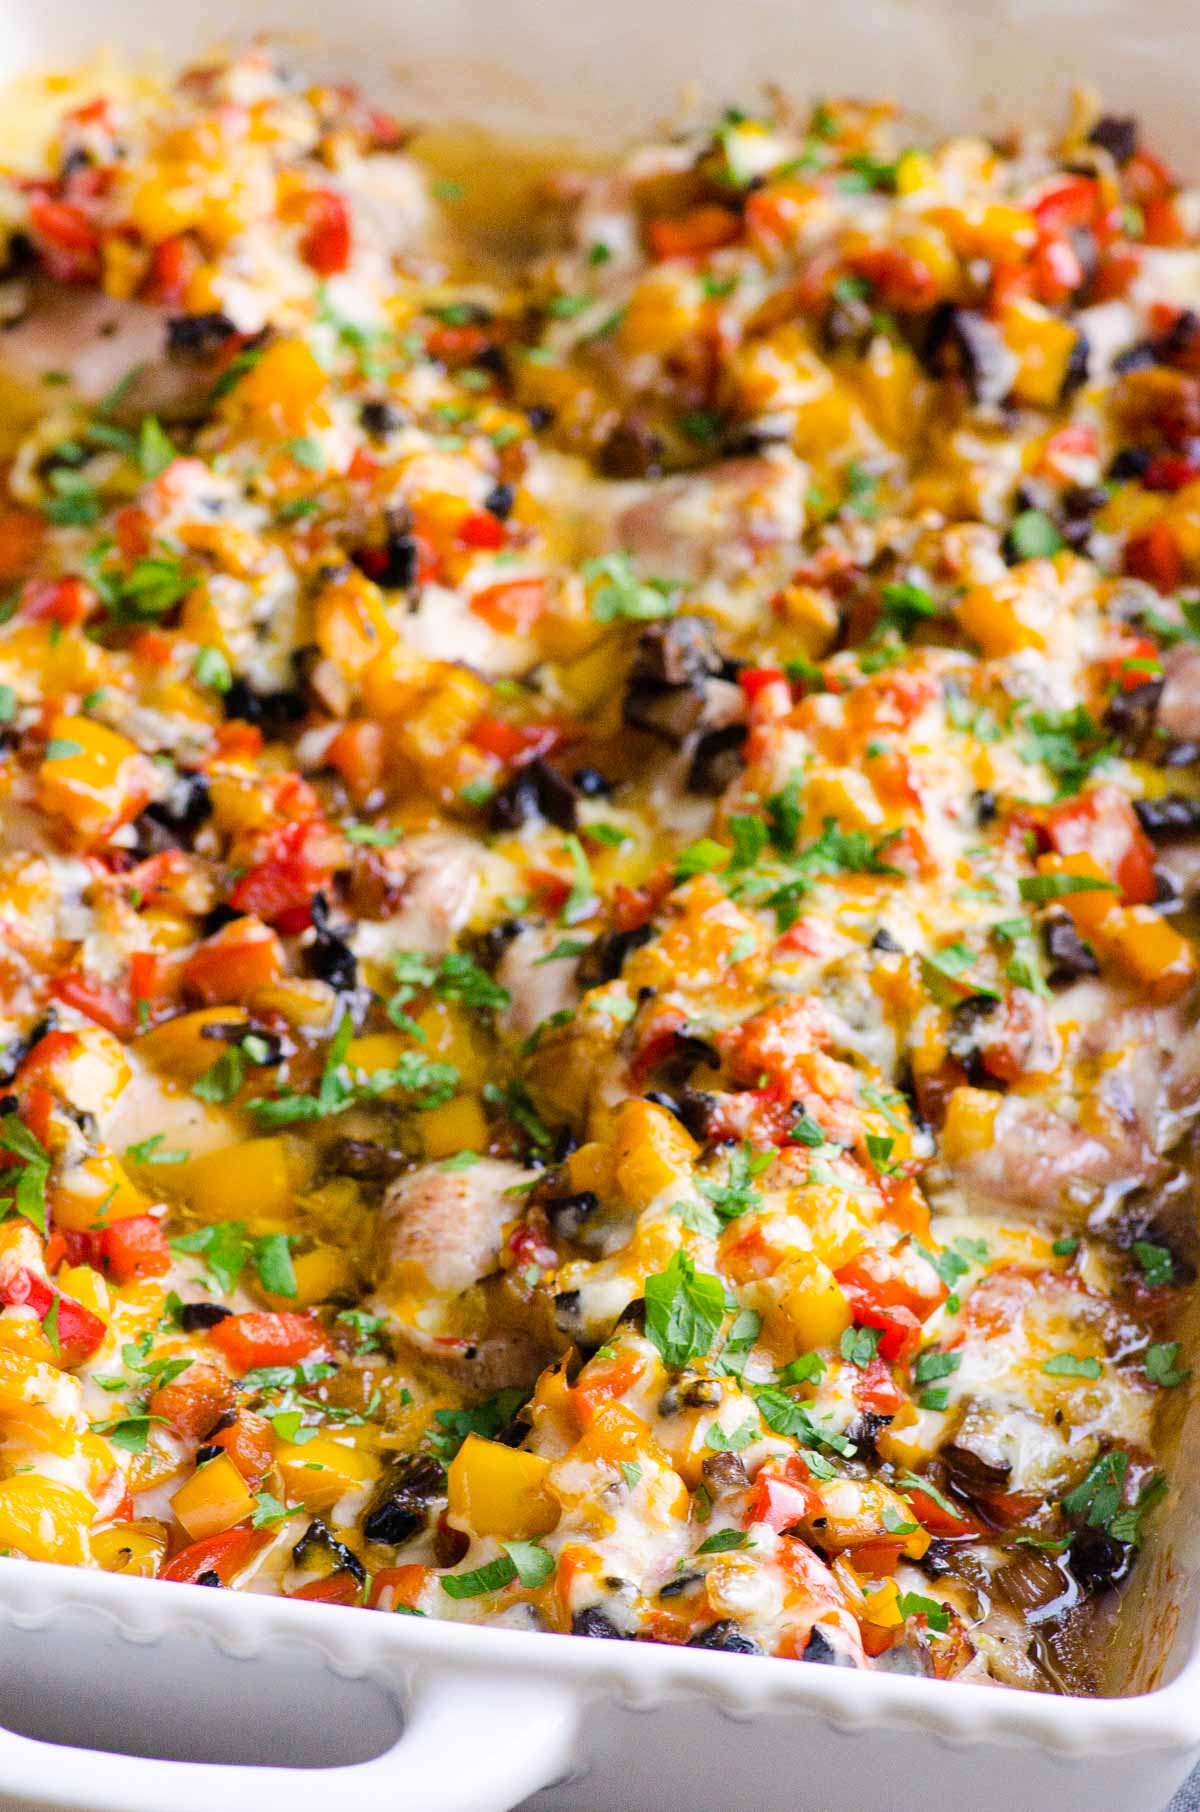 Baked chicken, mushrooms and peppers topped with cheese in baking dish.